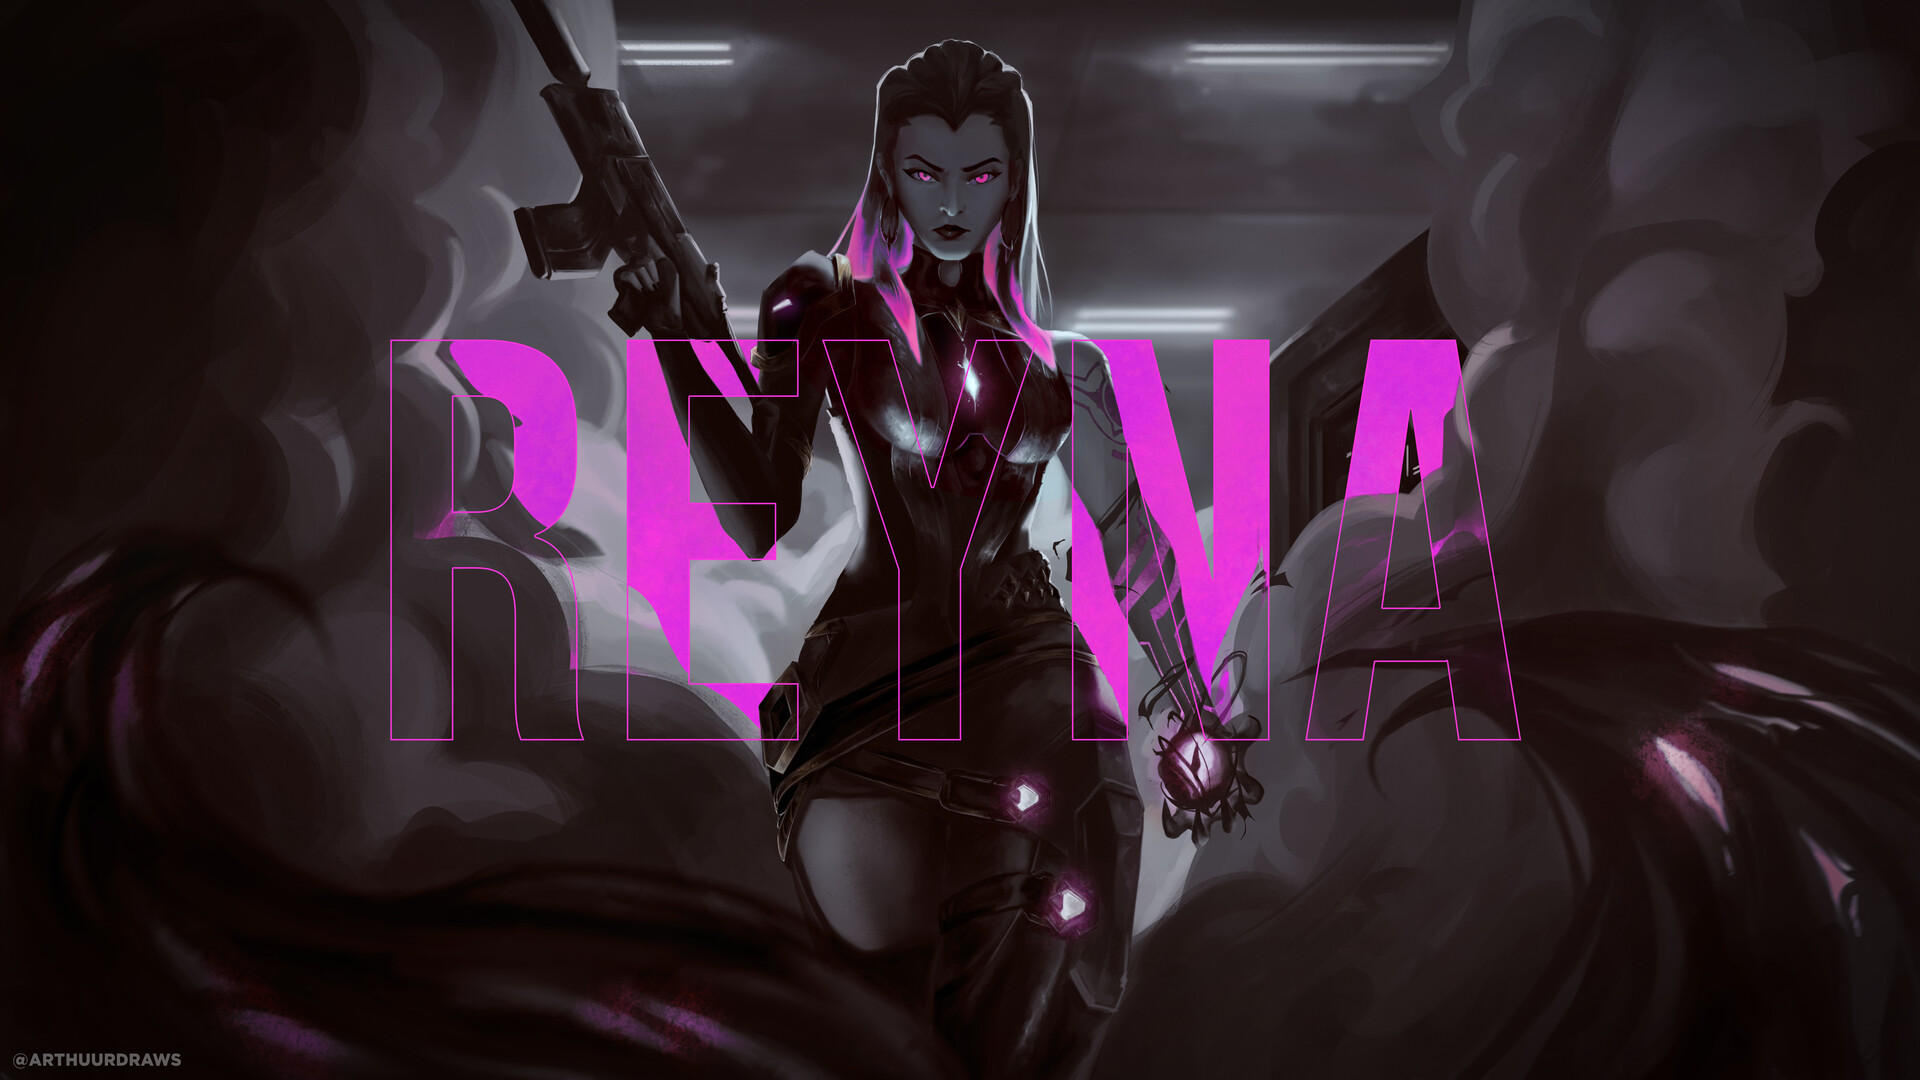 Made a wallpaper for Reyna. : r/VALORANT